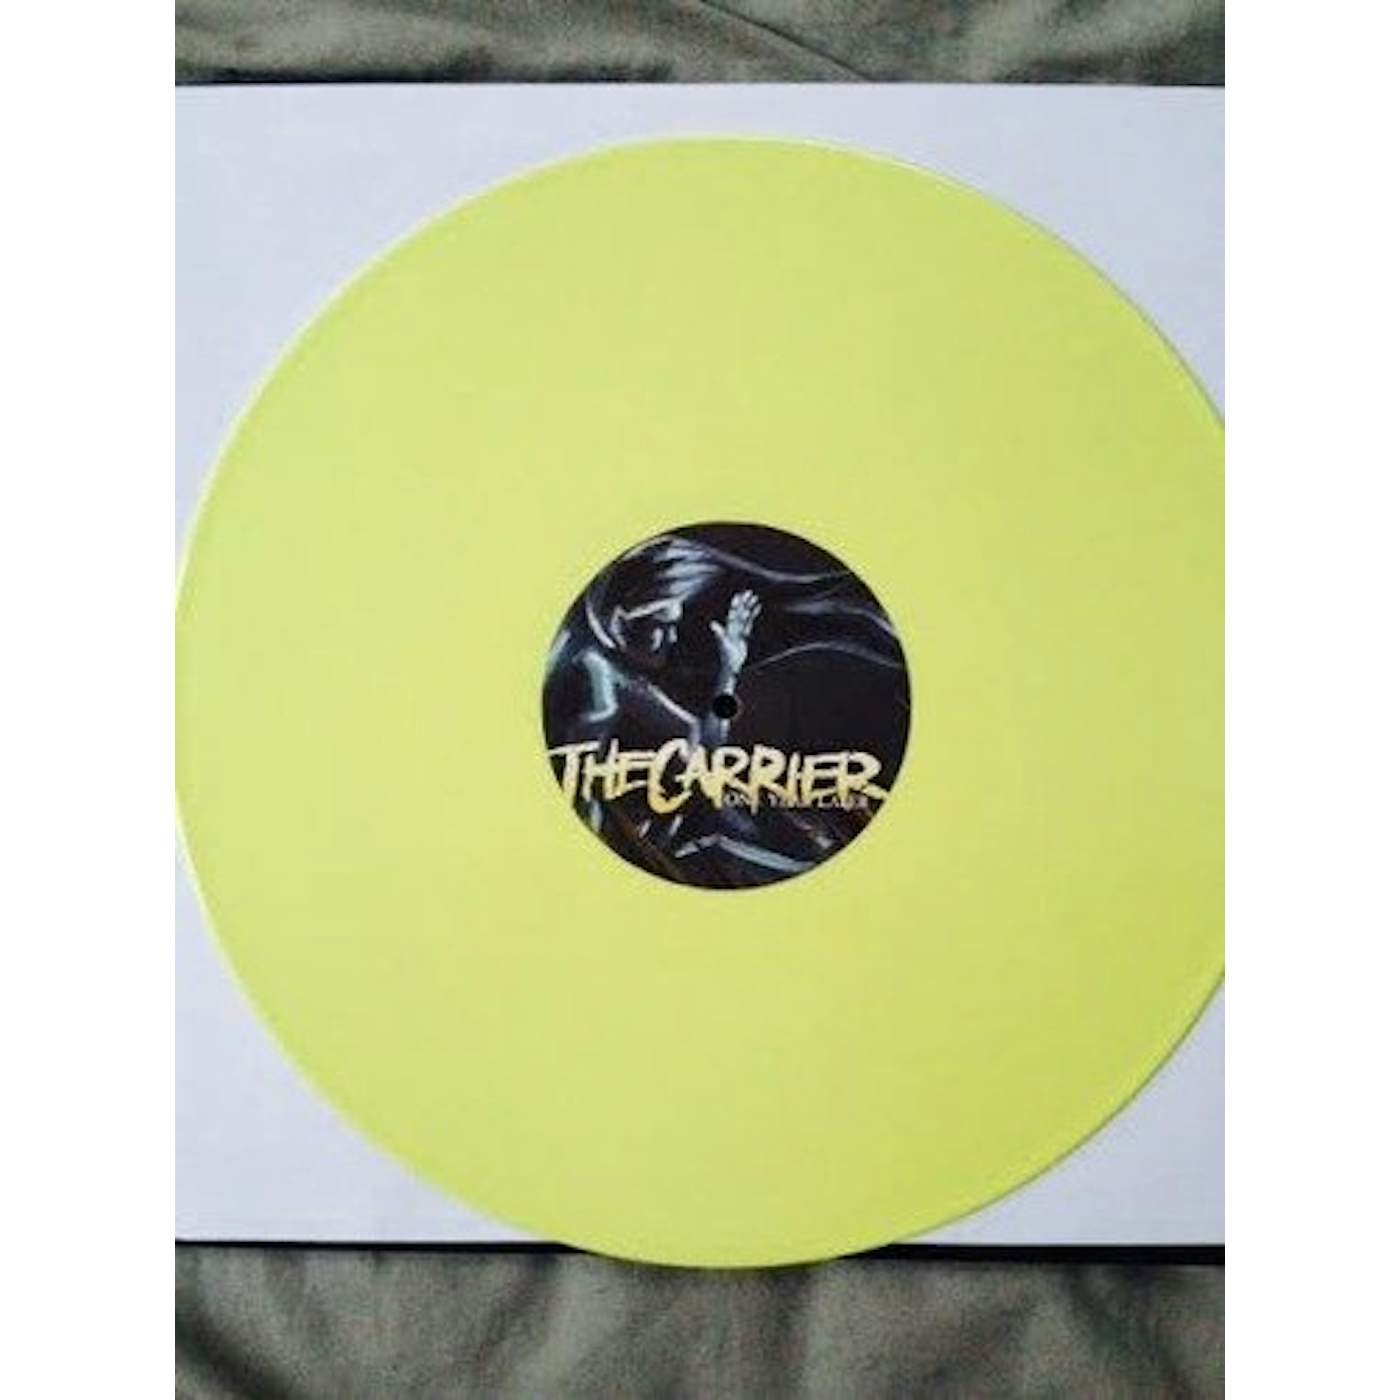 Carrier ONE YEAR LATER Vinyl Record